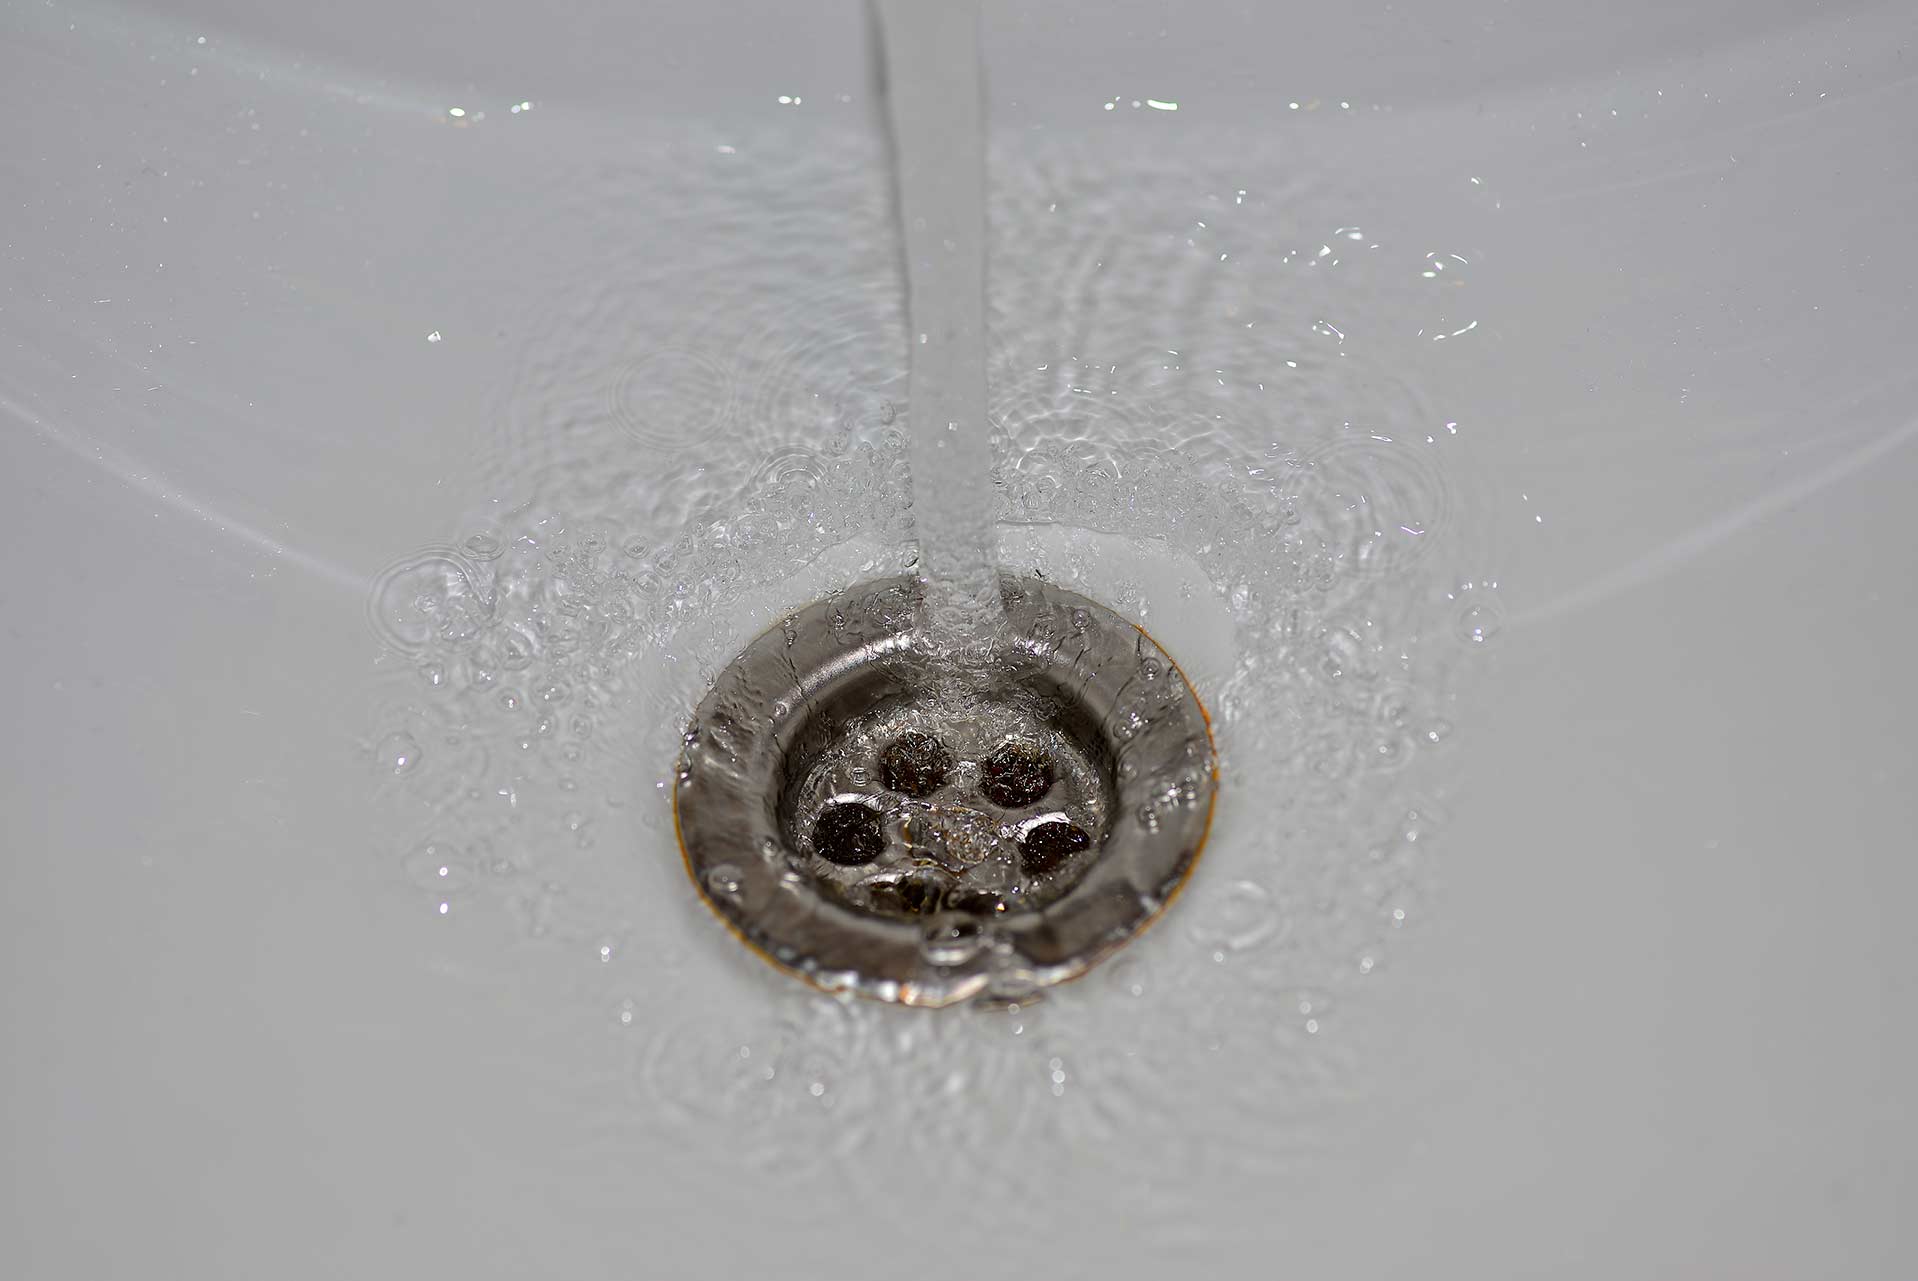 A2B Drains provides services to unblock blocked sinks and drains for properties in Penzance.